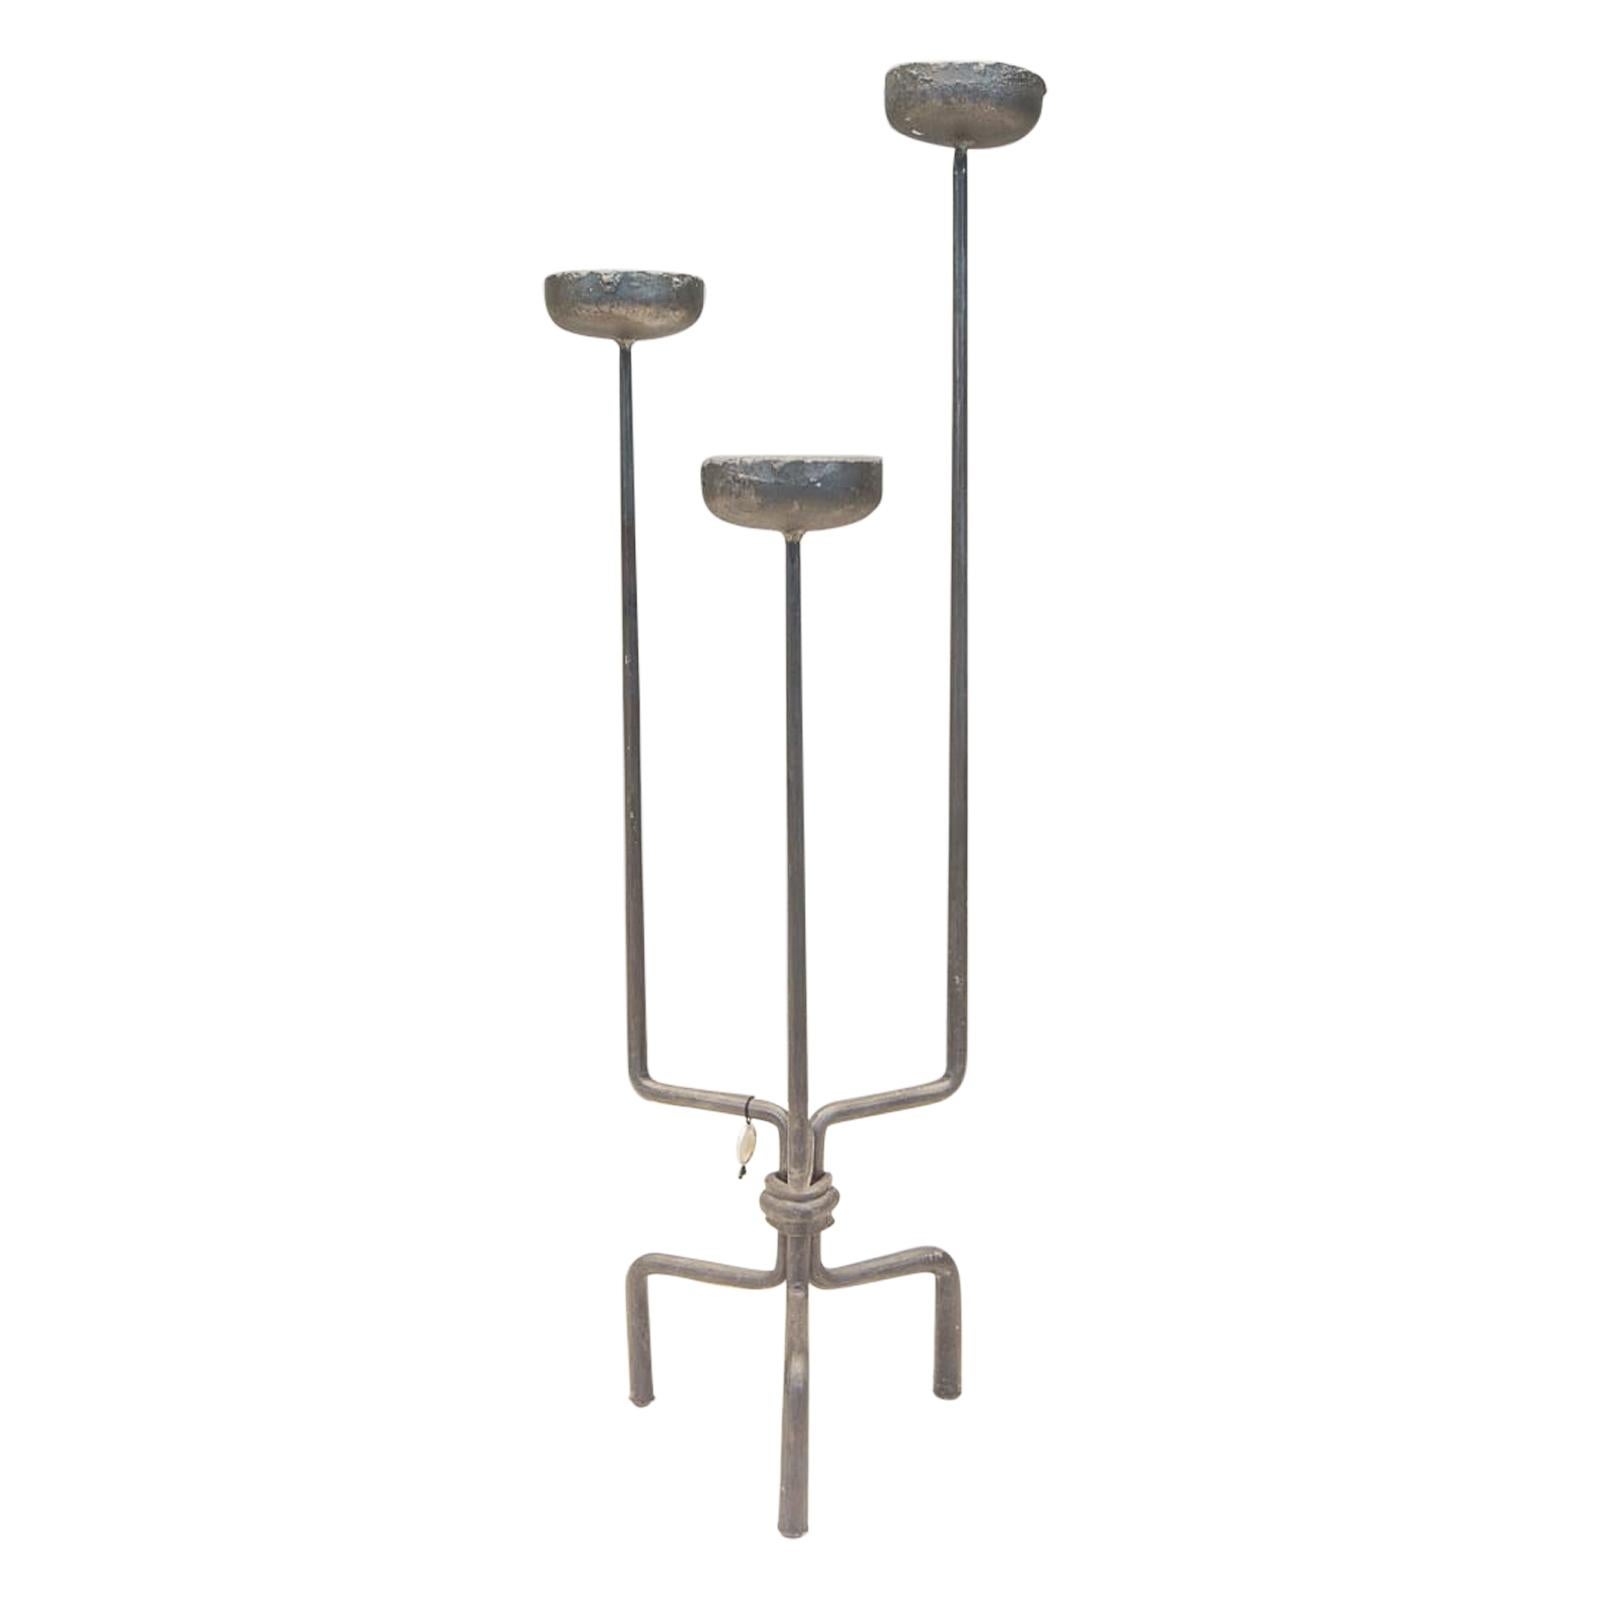 Pair of Floor Wrought Candleholders by Manfred Bredohl Vulkanschmiede, 1970s